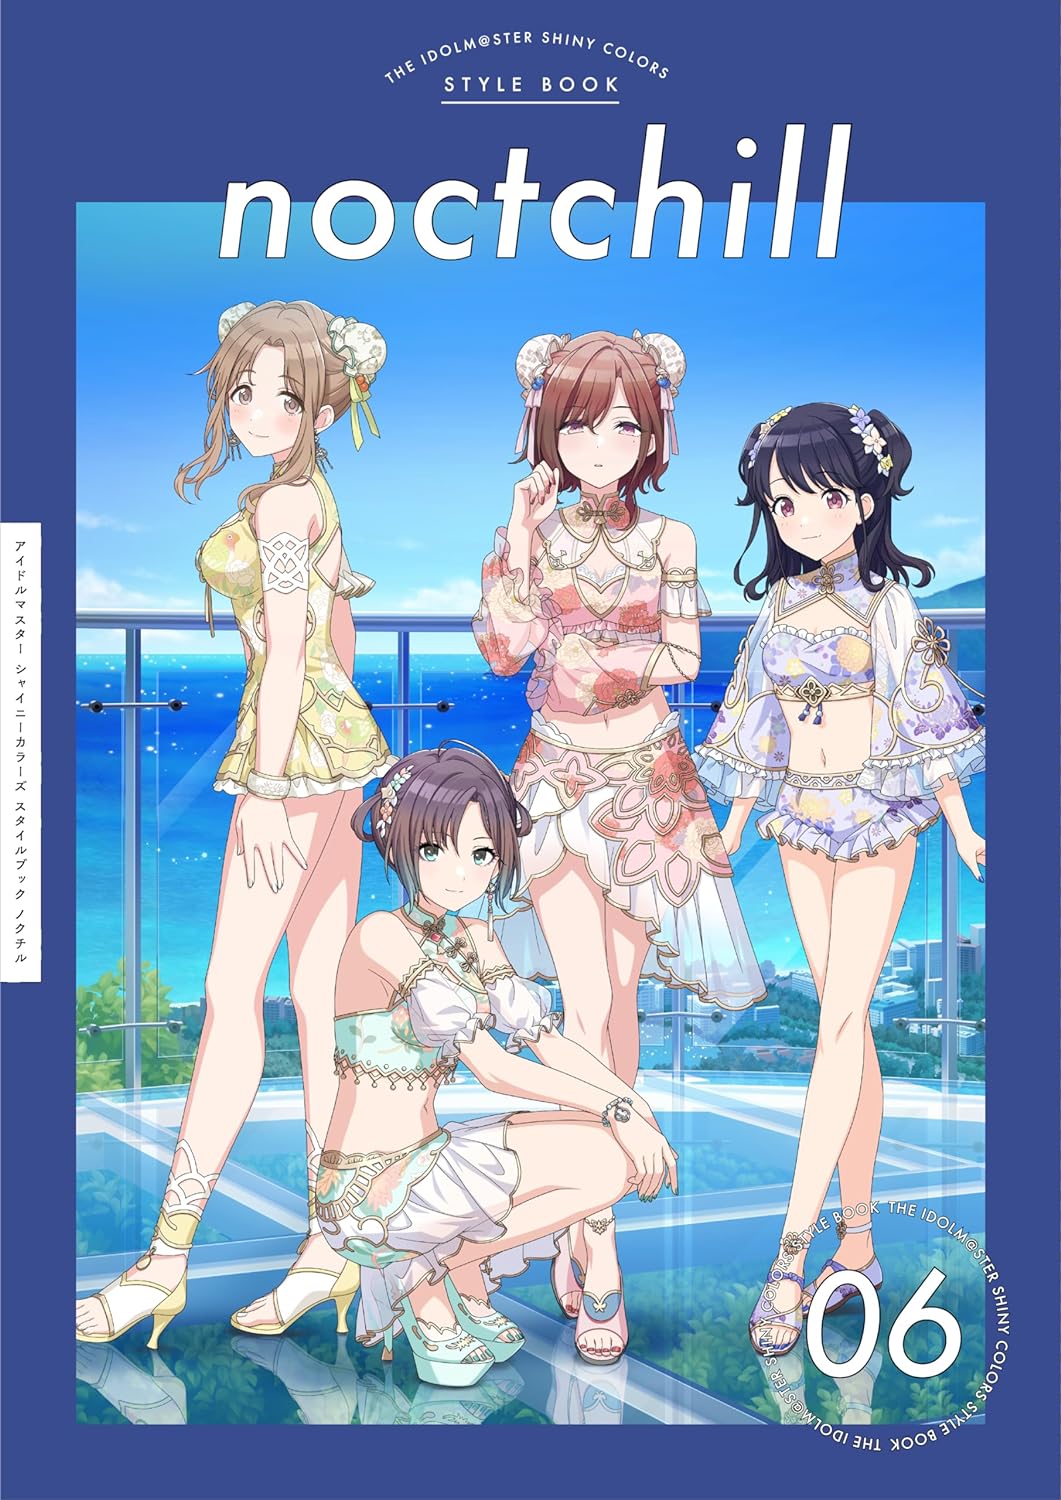 The Idolmaster Shiny Colors Style Book nocichill W/CD